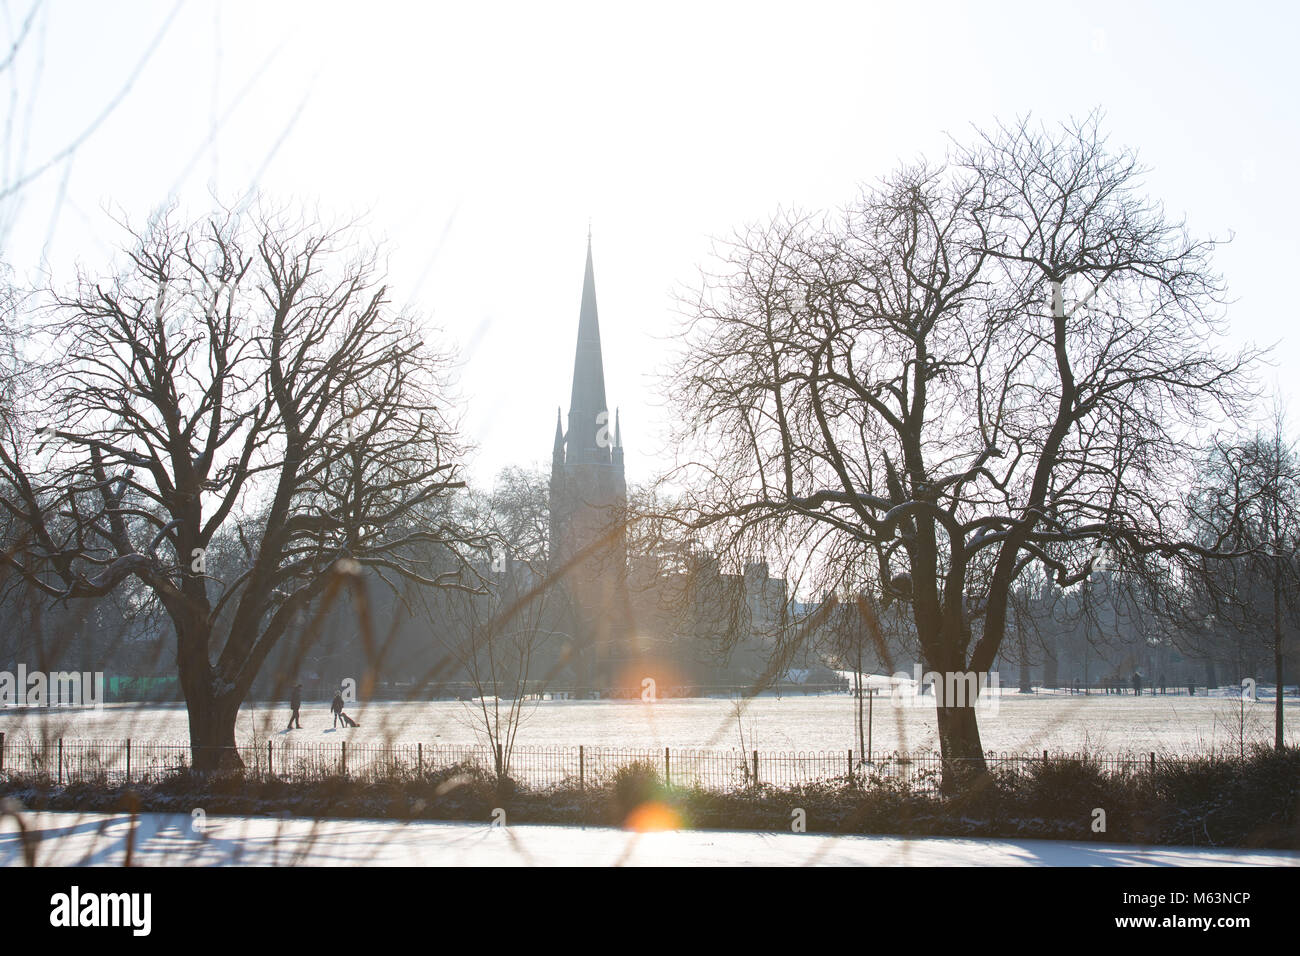 London, UK. 28th February 2018. UK weather, snow in Stoke Newington. St MAry's church seen from through snow covered Clissold Park. Credit: Carol Moir/Alamy Live News. Stock Photo